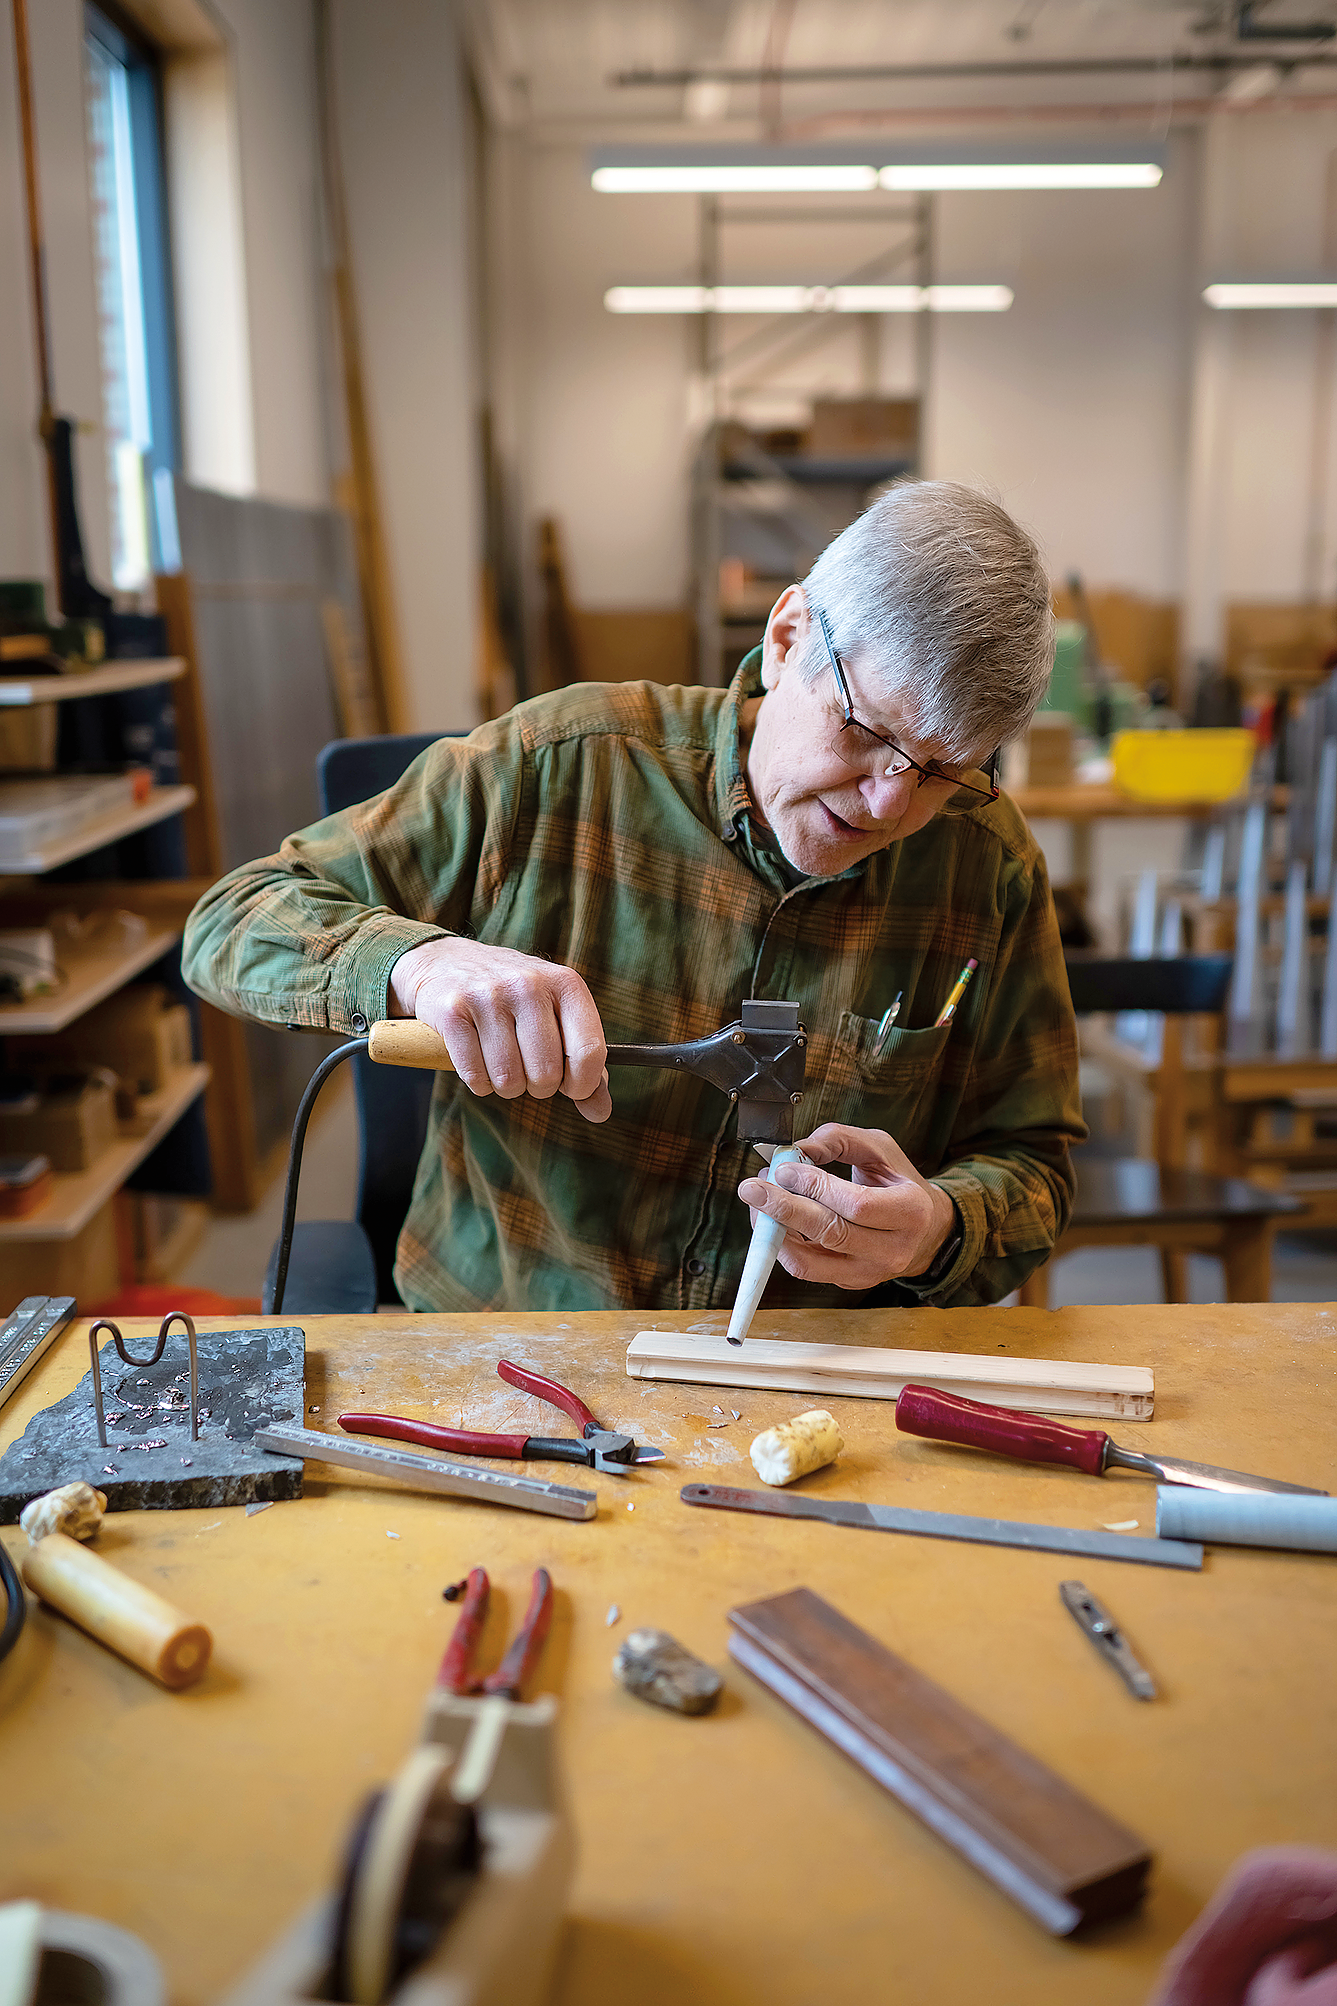 Renowned organ builder Martin Pasi, who moved his shop from Washington state, solders a lead-tin alloy organ pipe. Photo by Caroline Yang.